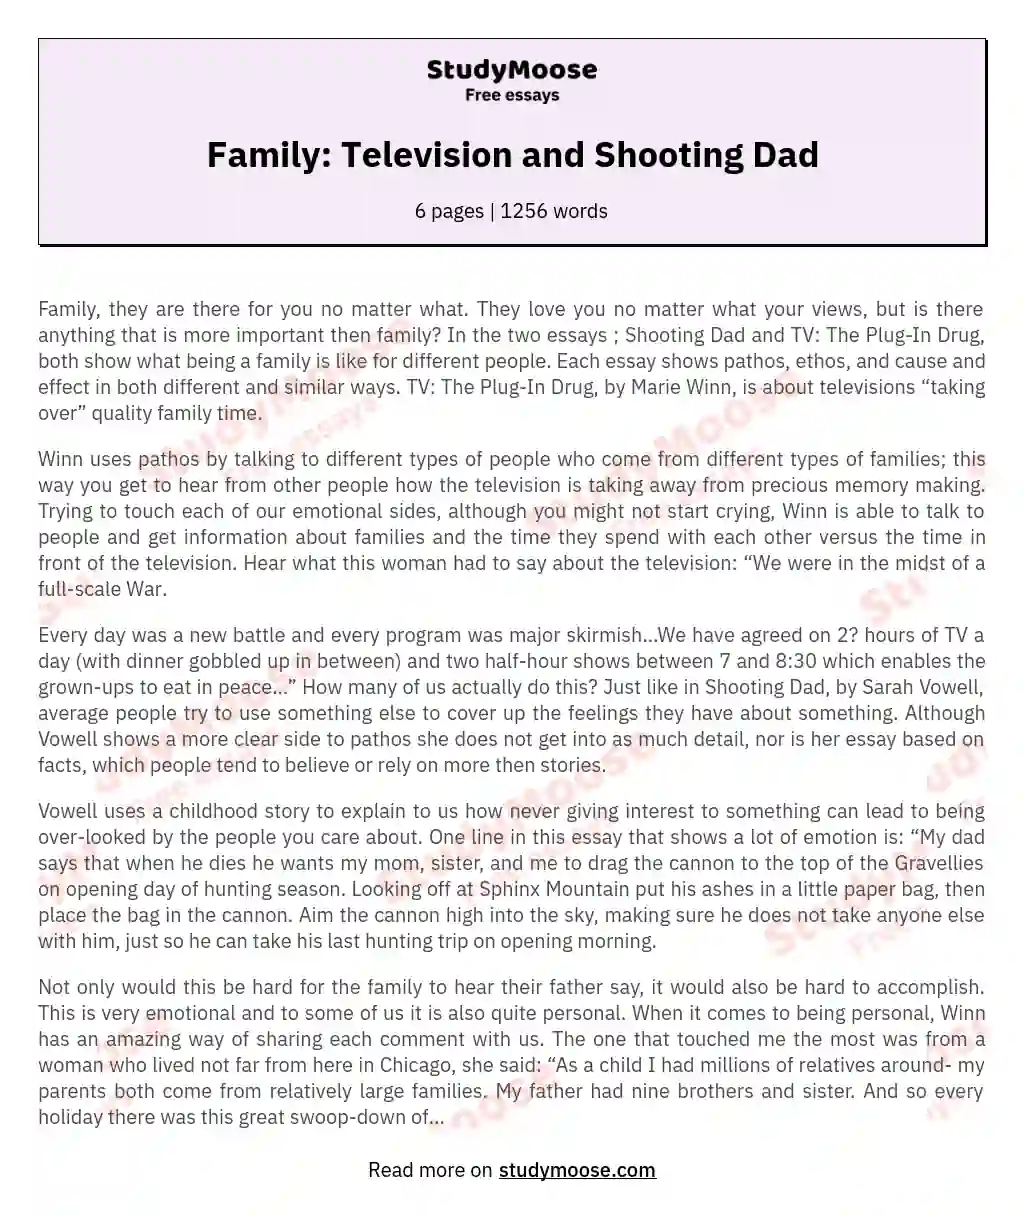 Family: Television and Shooting Dad essay